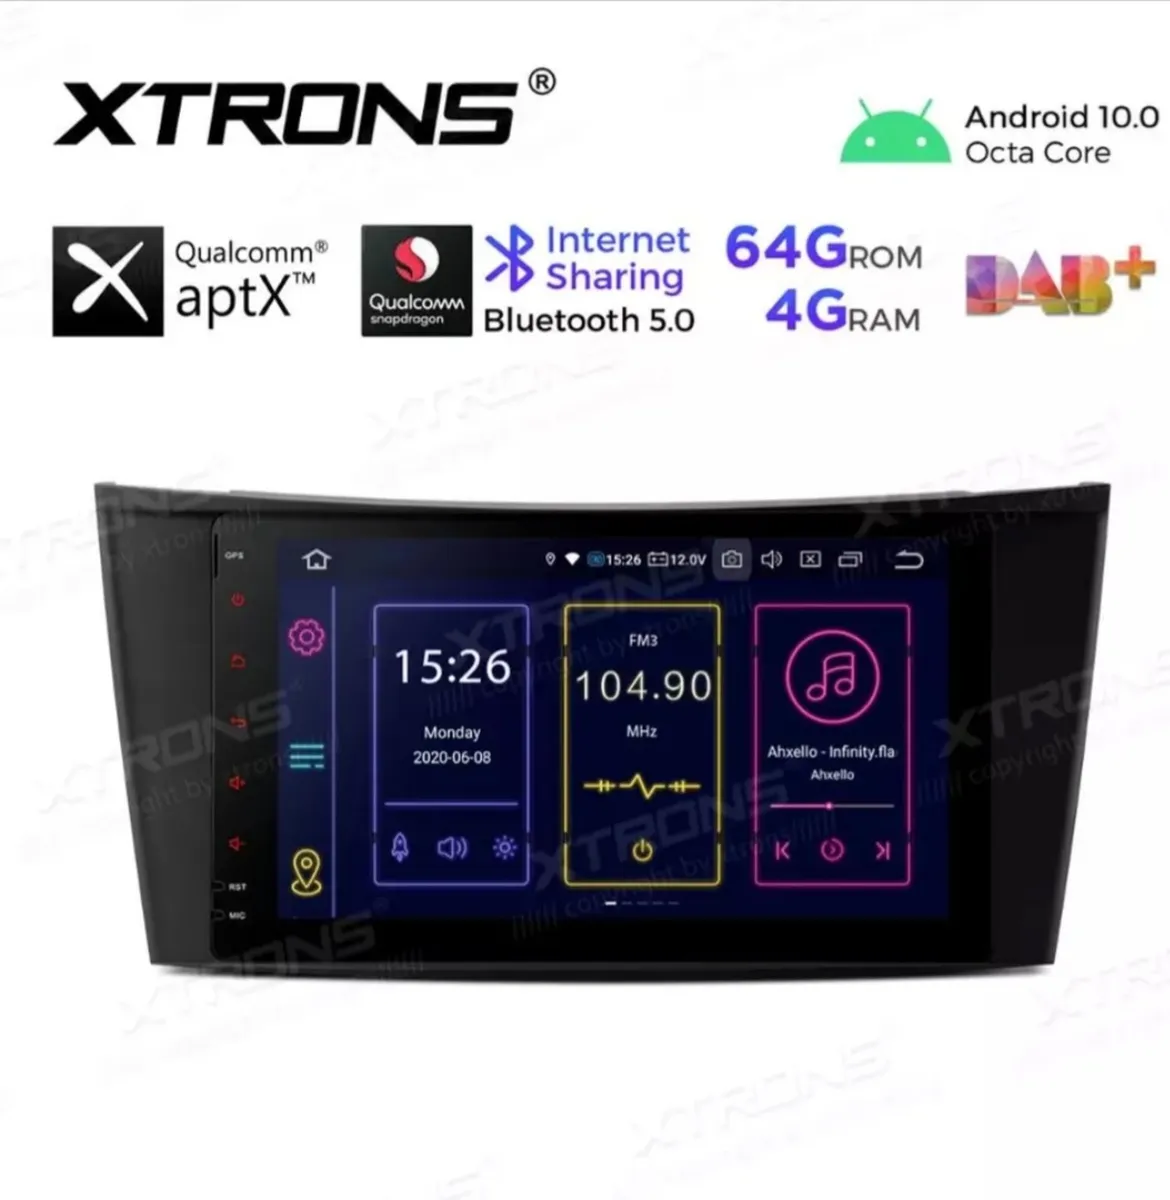 Xtron android car radio & accessories - Image 1